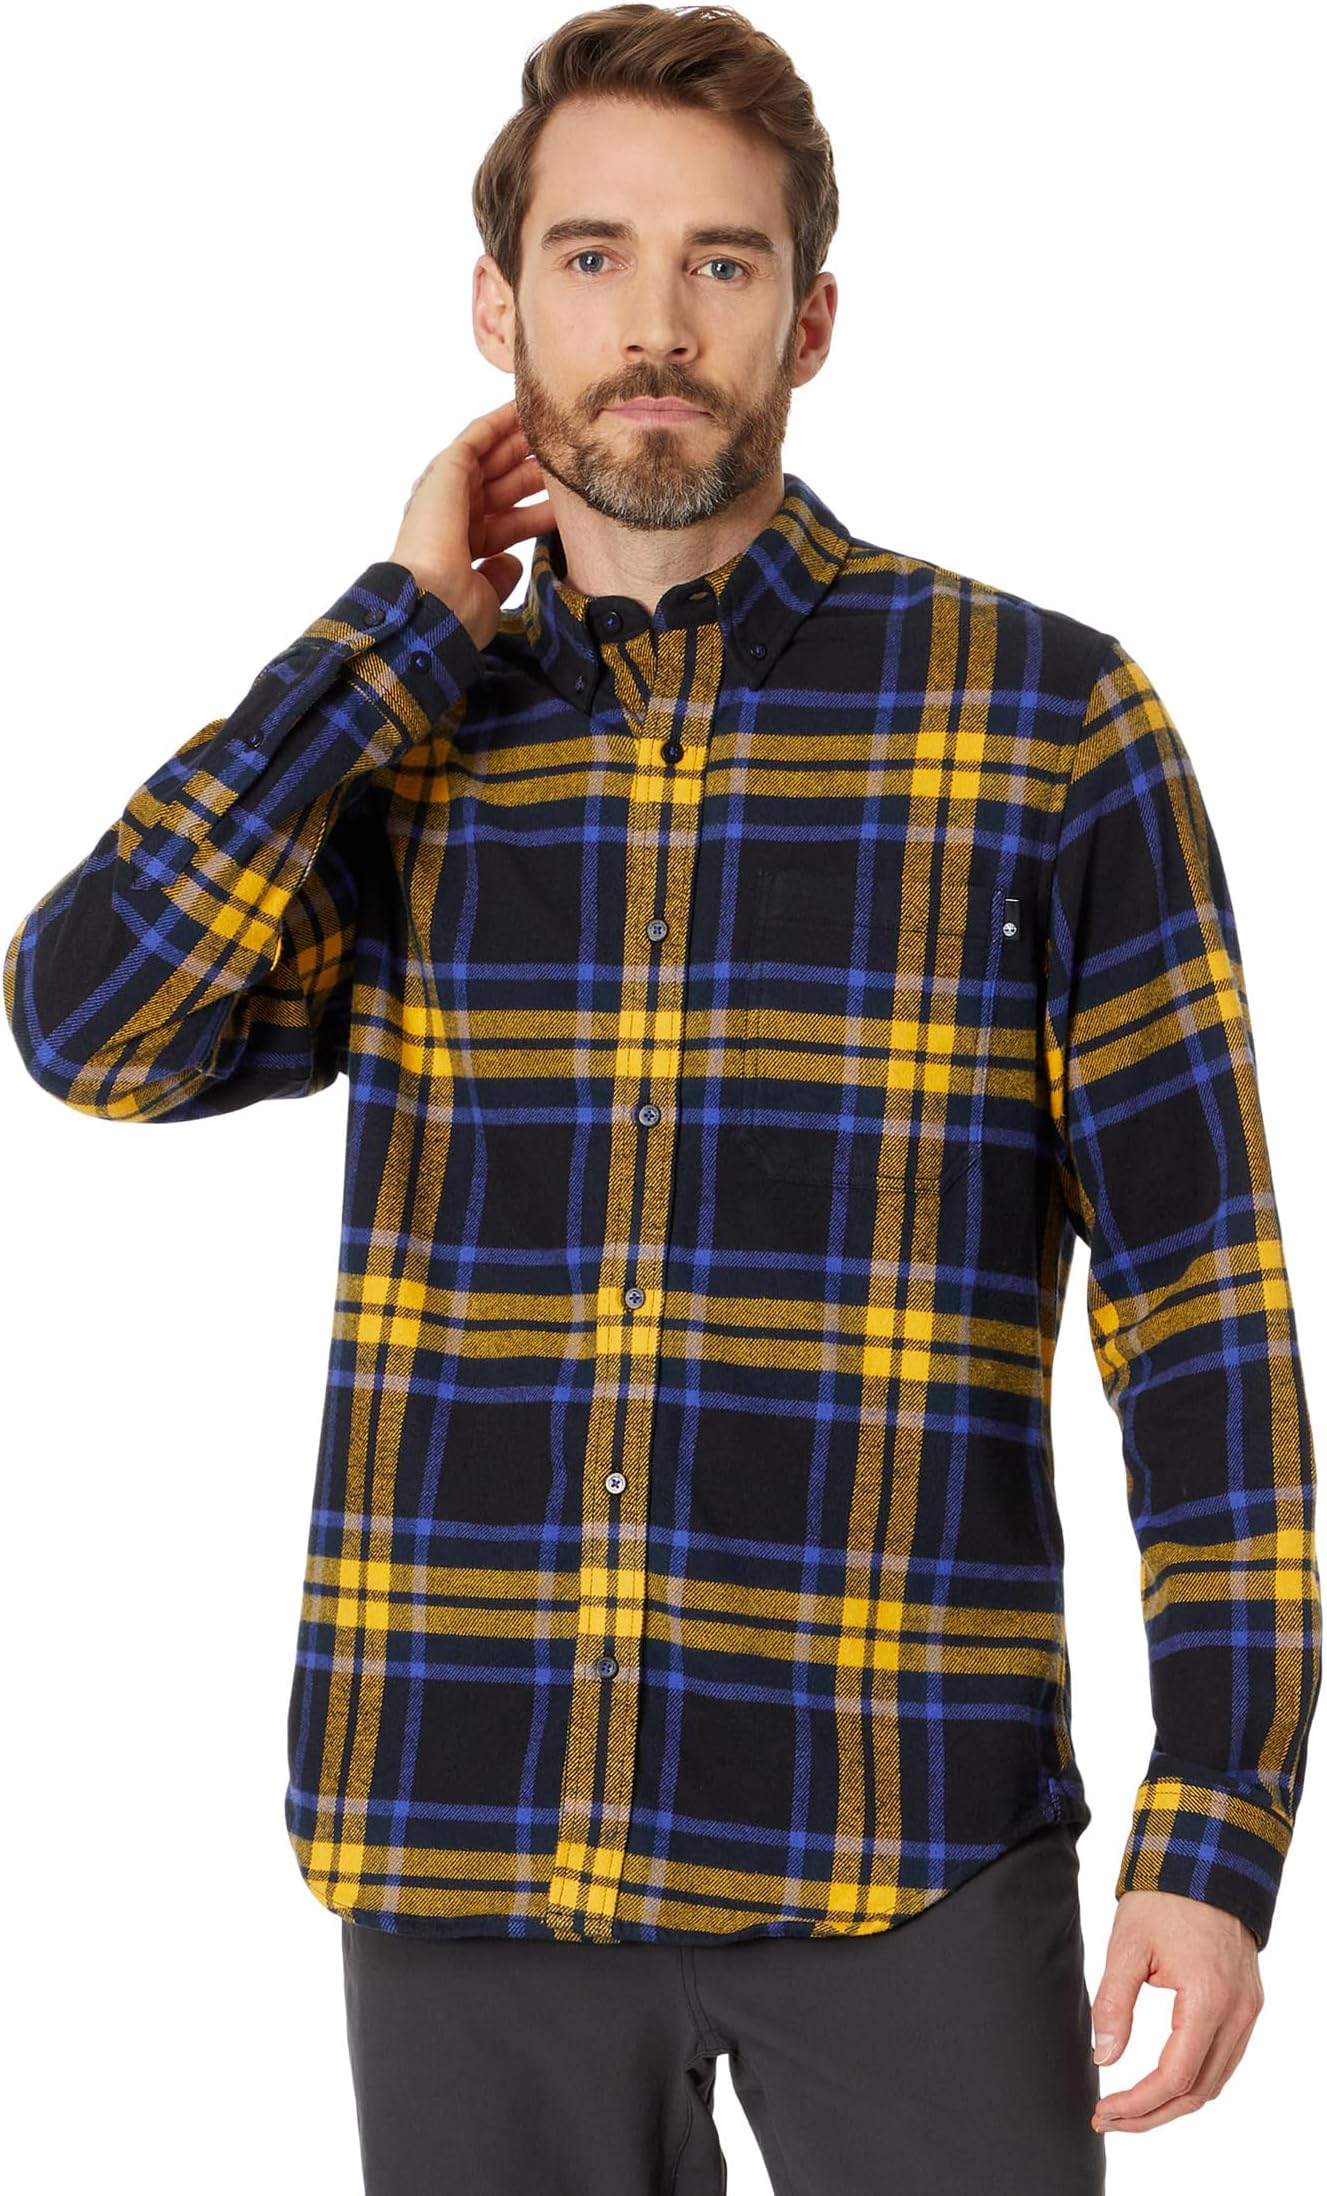 high quality plaid blouses men 2022 spring new long sleeve cotton oversized plaid shirts male hip hop flannel checked shirts Куртка Long Sleeve Heavy Flannel Plaid Timberland, черный